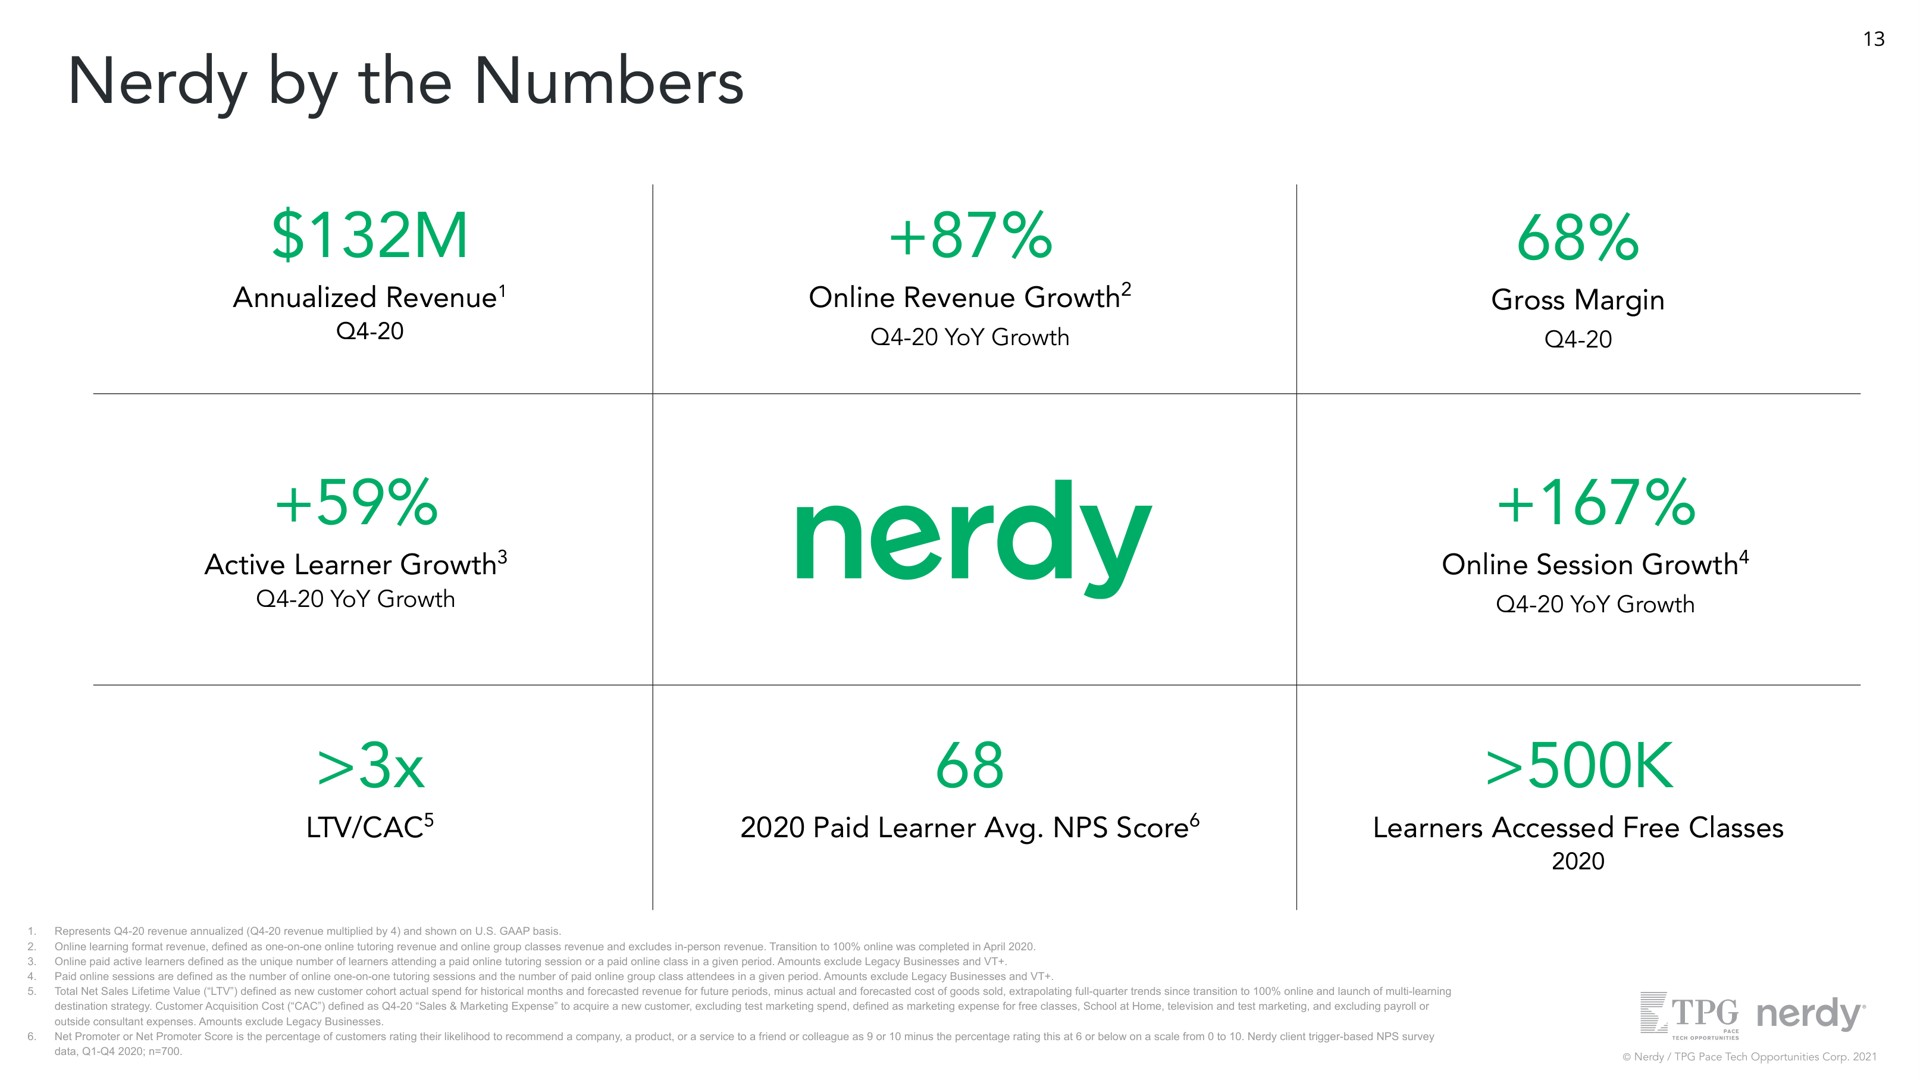 by the numbers revenue active learner growth revenue growth gross margin session growth paid learner score learners accessed free classes | Nerdy